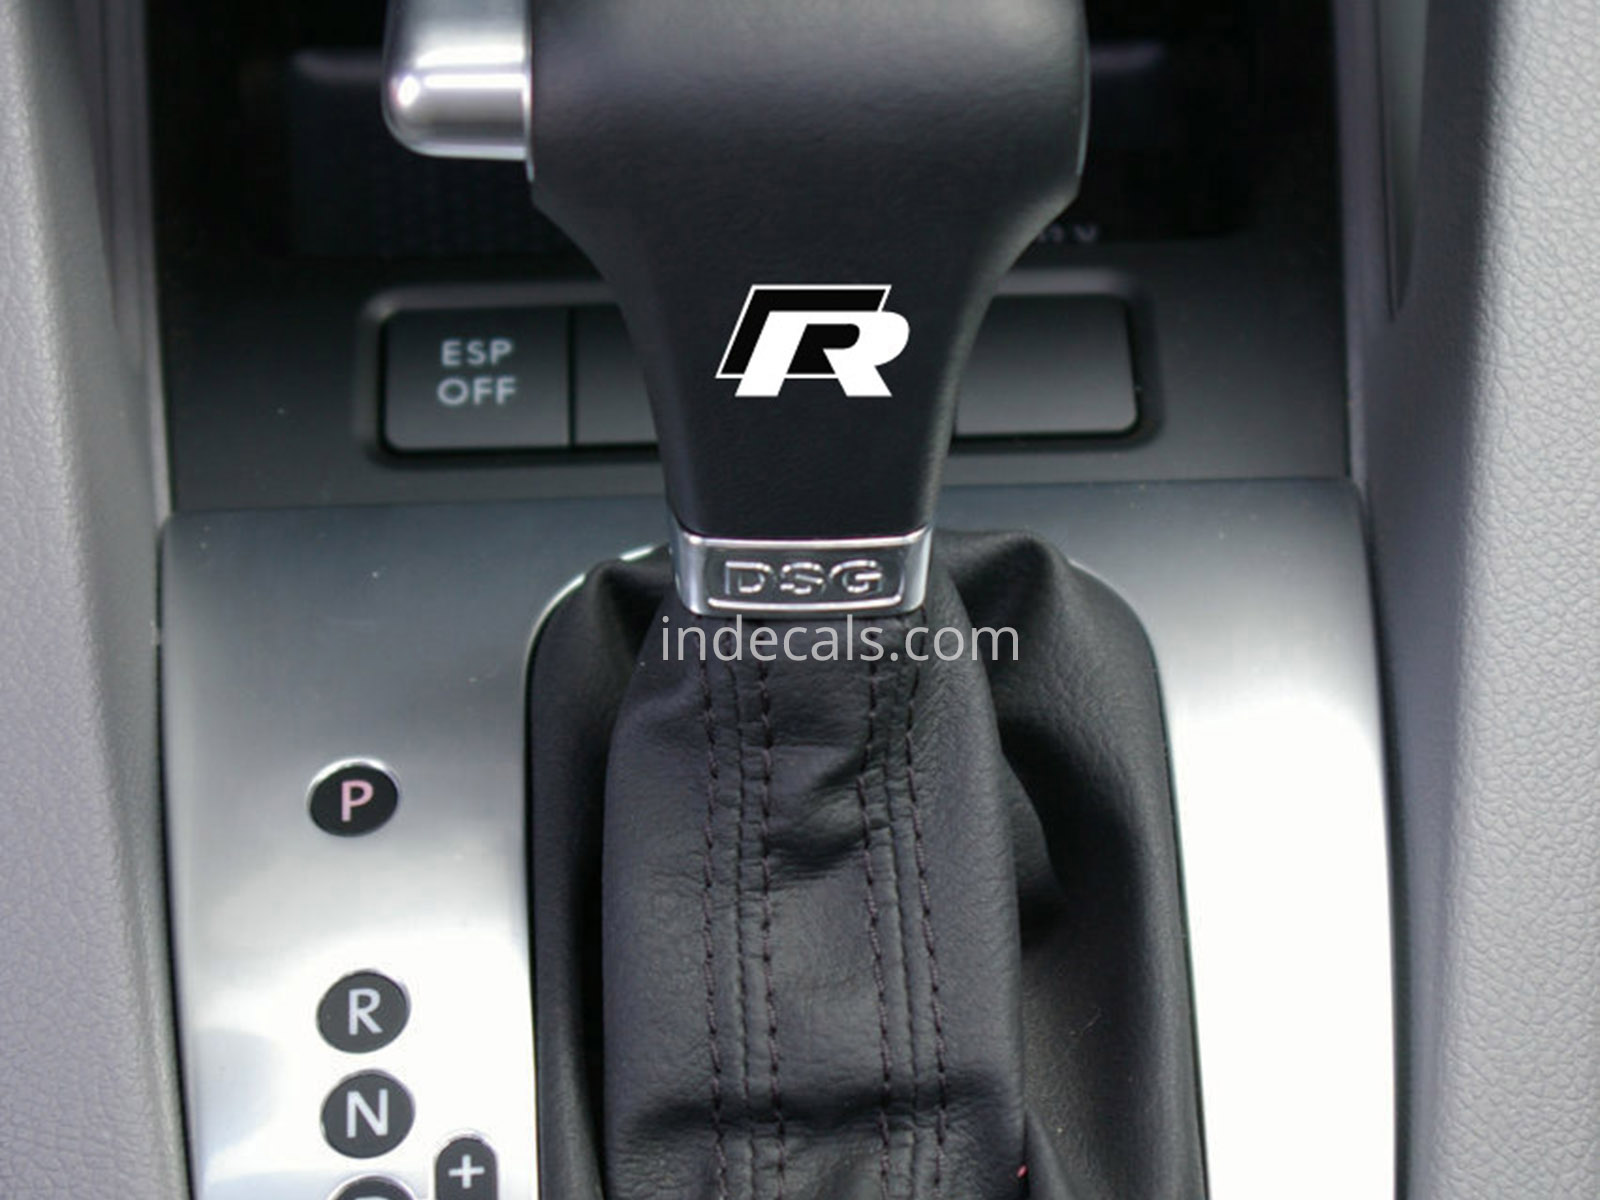 2 x Volkswagen R-Line stickers for Gear Lever